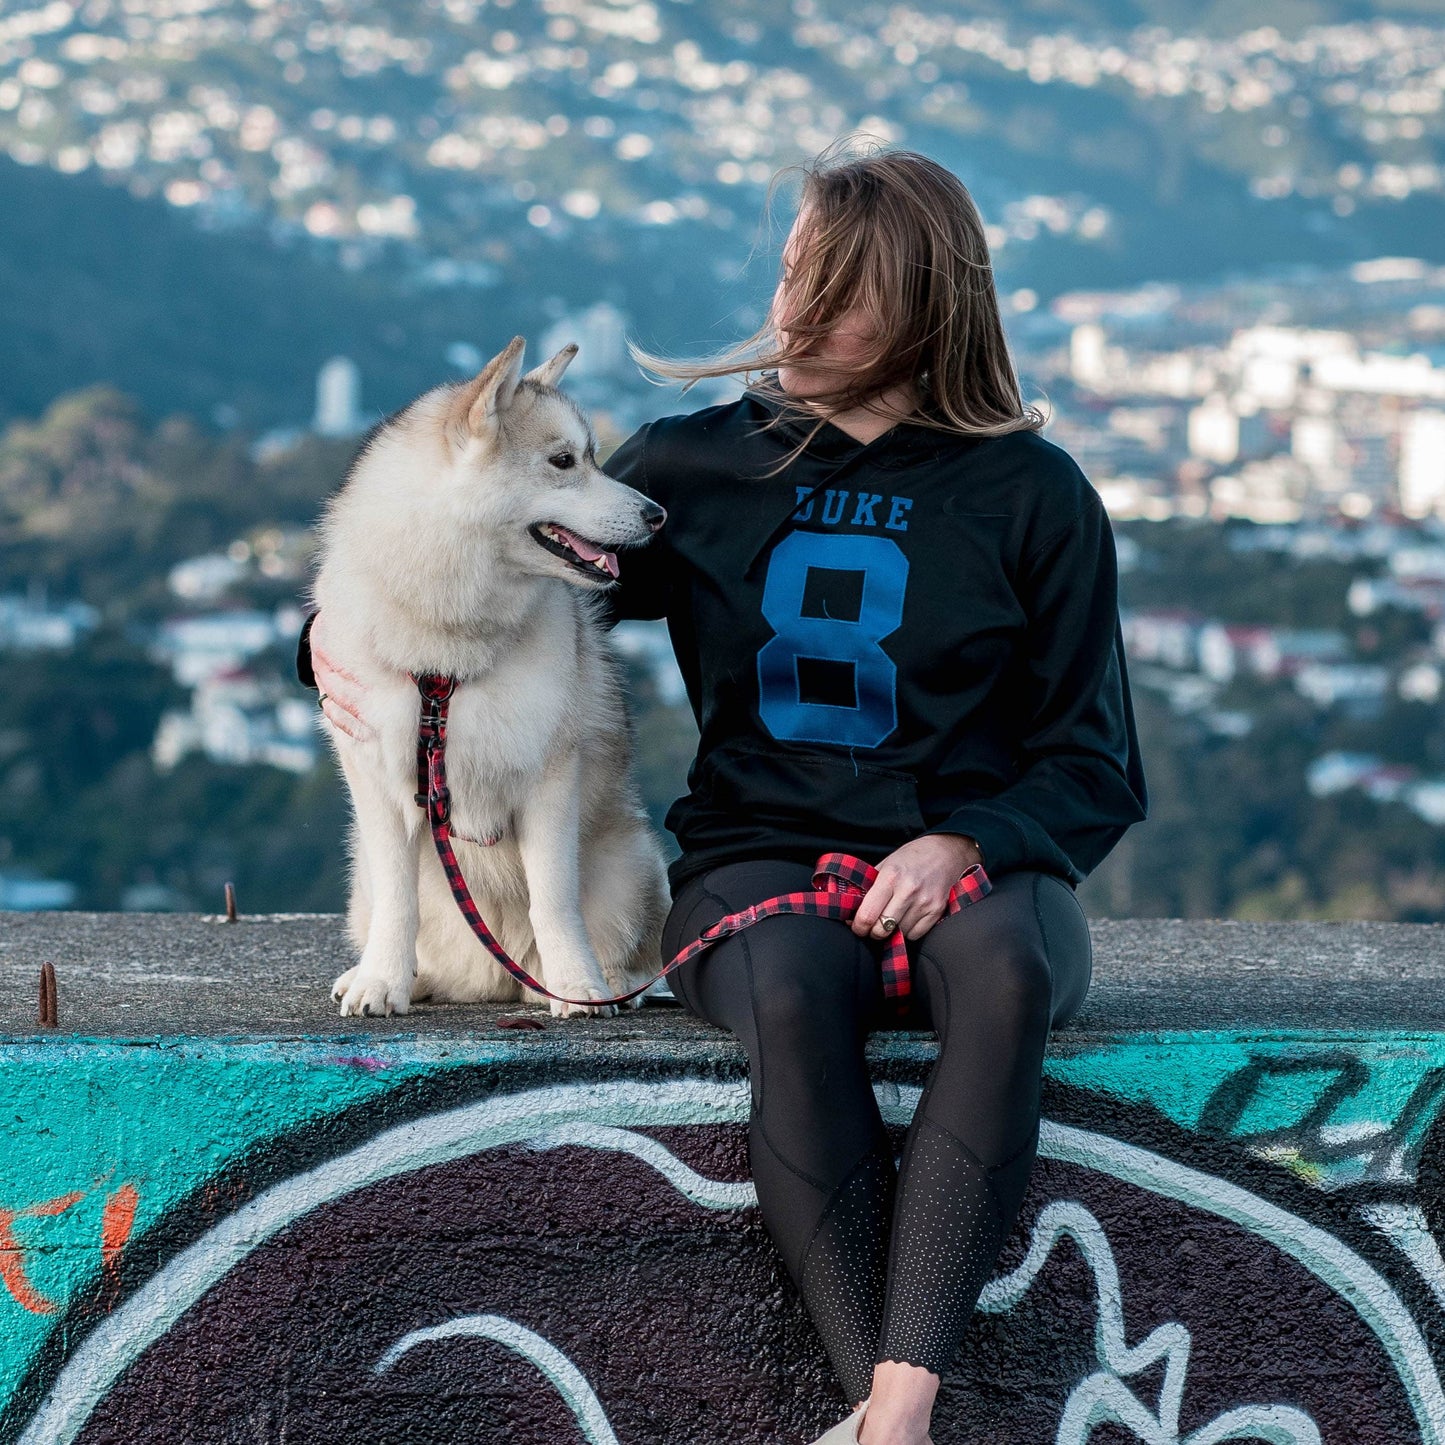 Woman and dog sitting on a wall. Woman is holding a red and black checked dog leash.